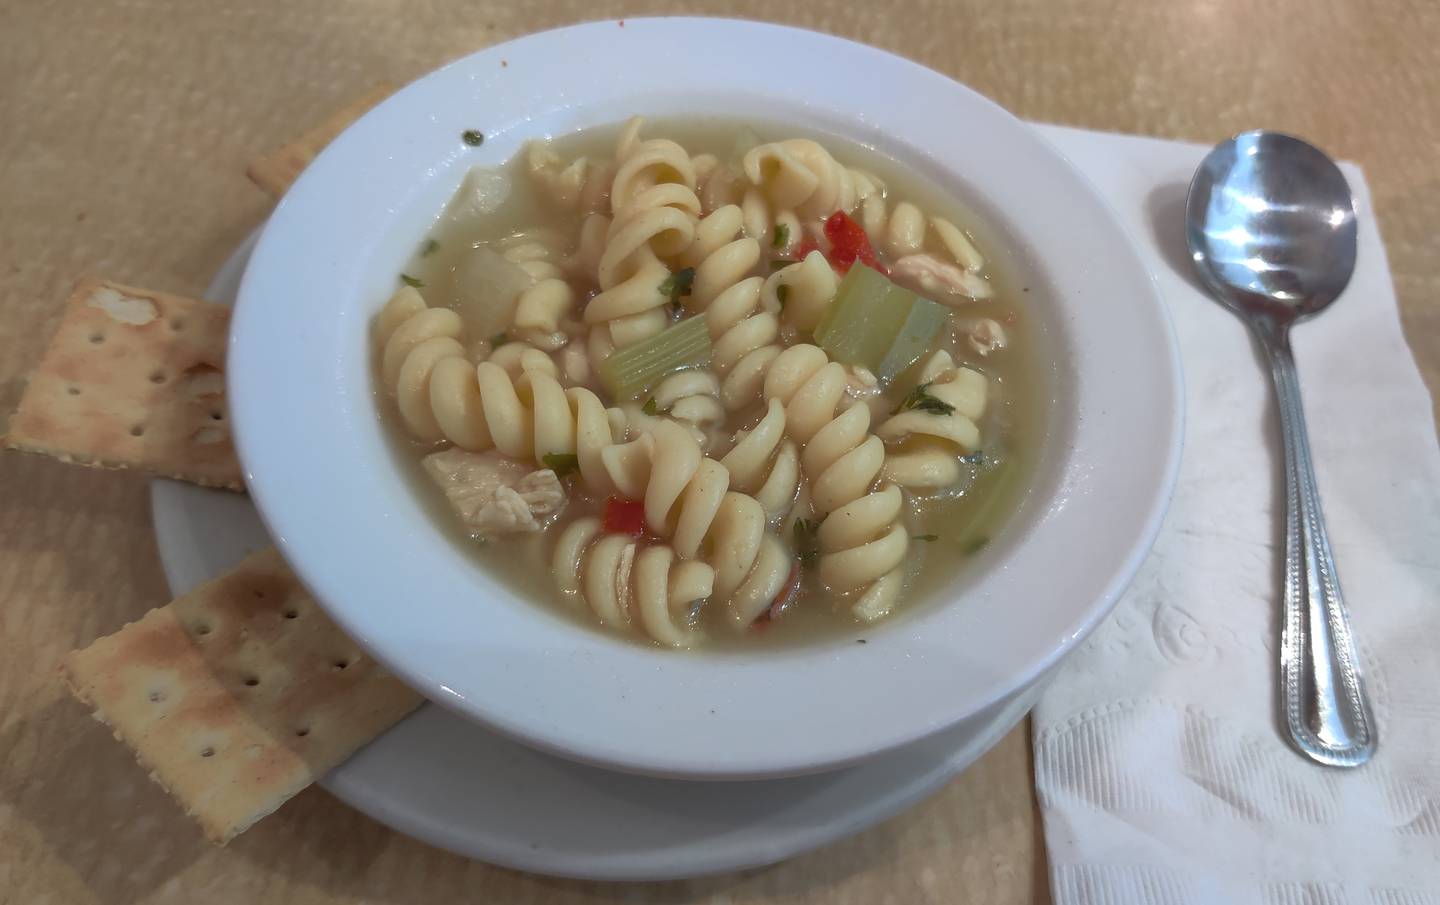 Chicken noodle soup at Randall's Pancake House & Restaurant in South Elgin.